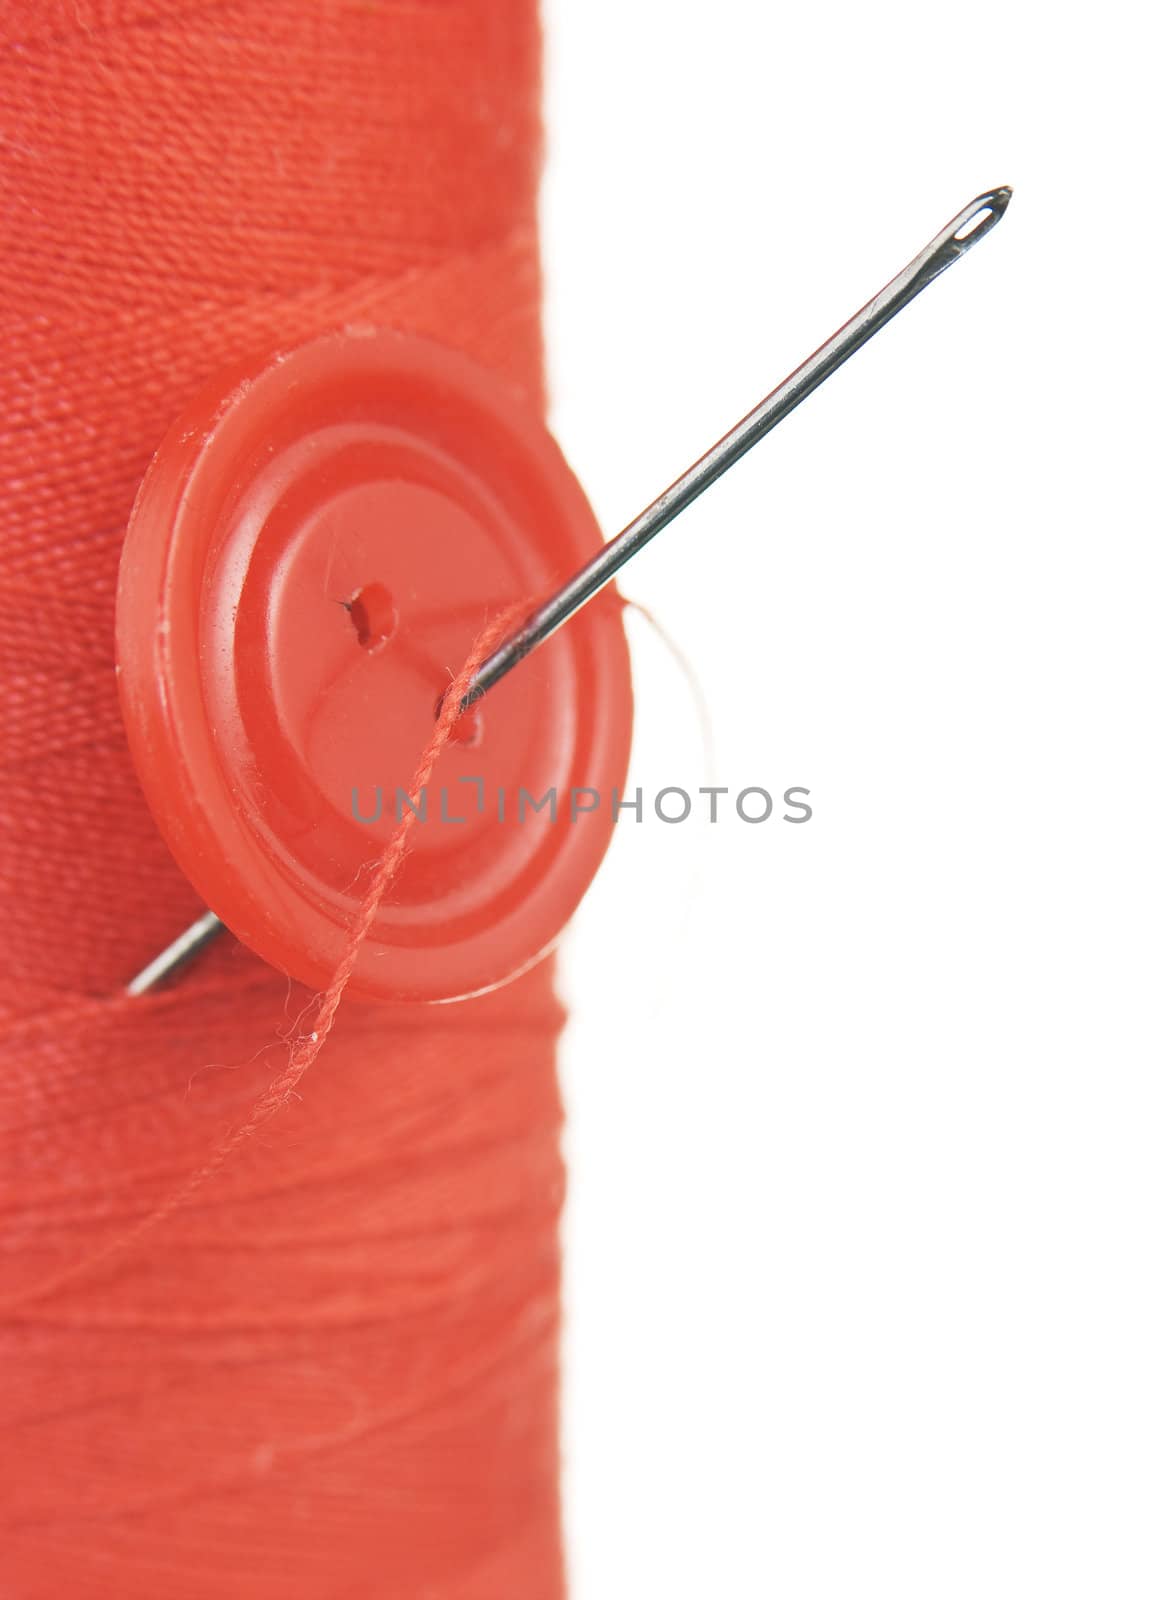 Button with a needle on spool of thread by oleg_zhukov